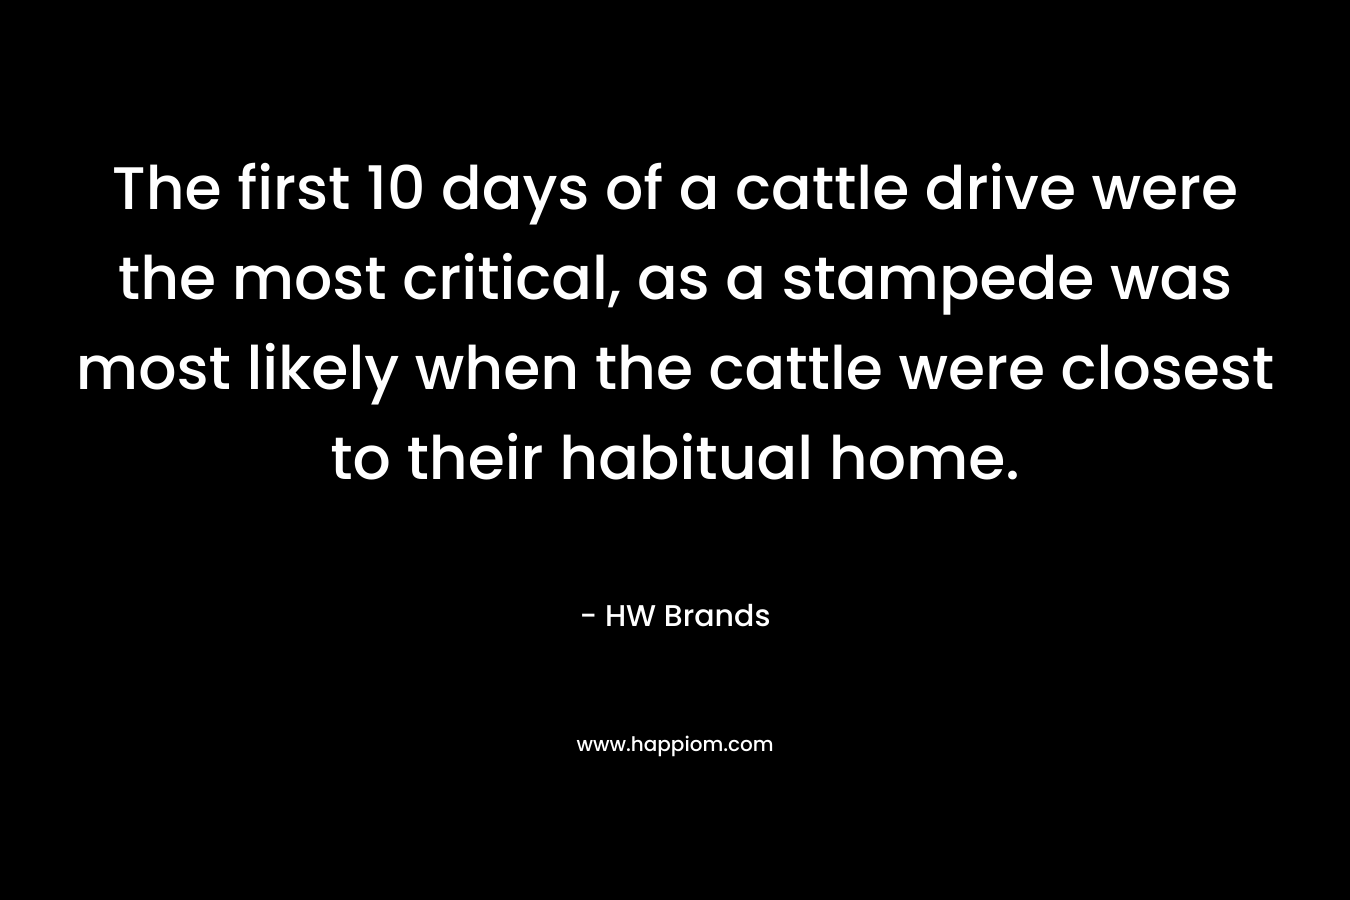 The first 10 days of a cattle drive were the most critical, as a stampede was most likely when the cattle were closest to their habitual home.